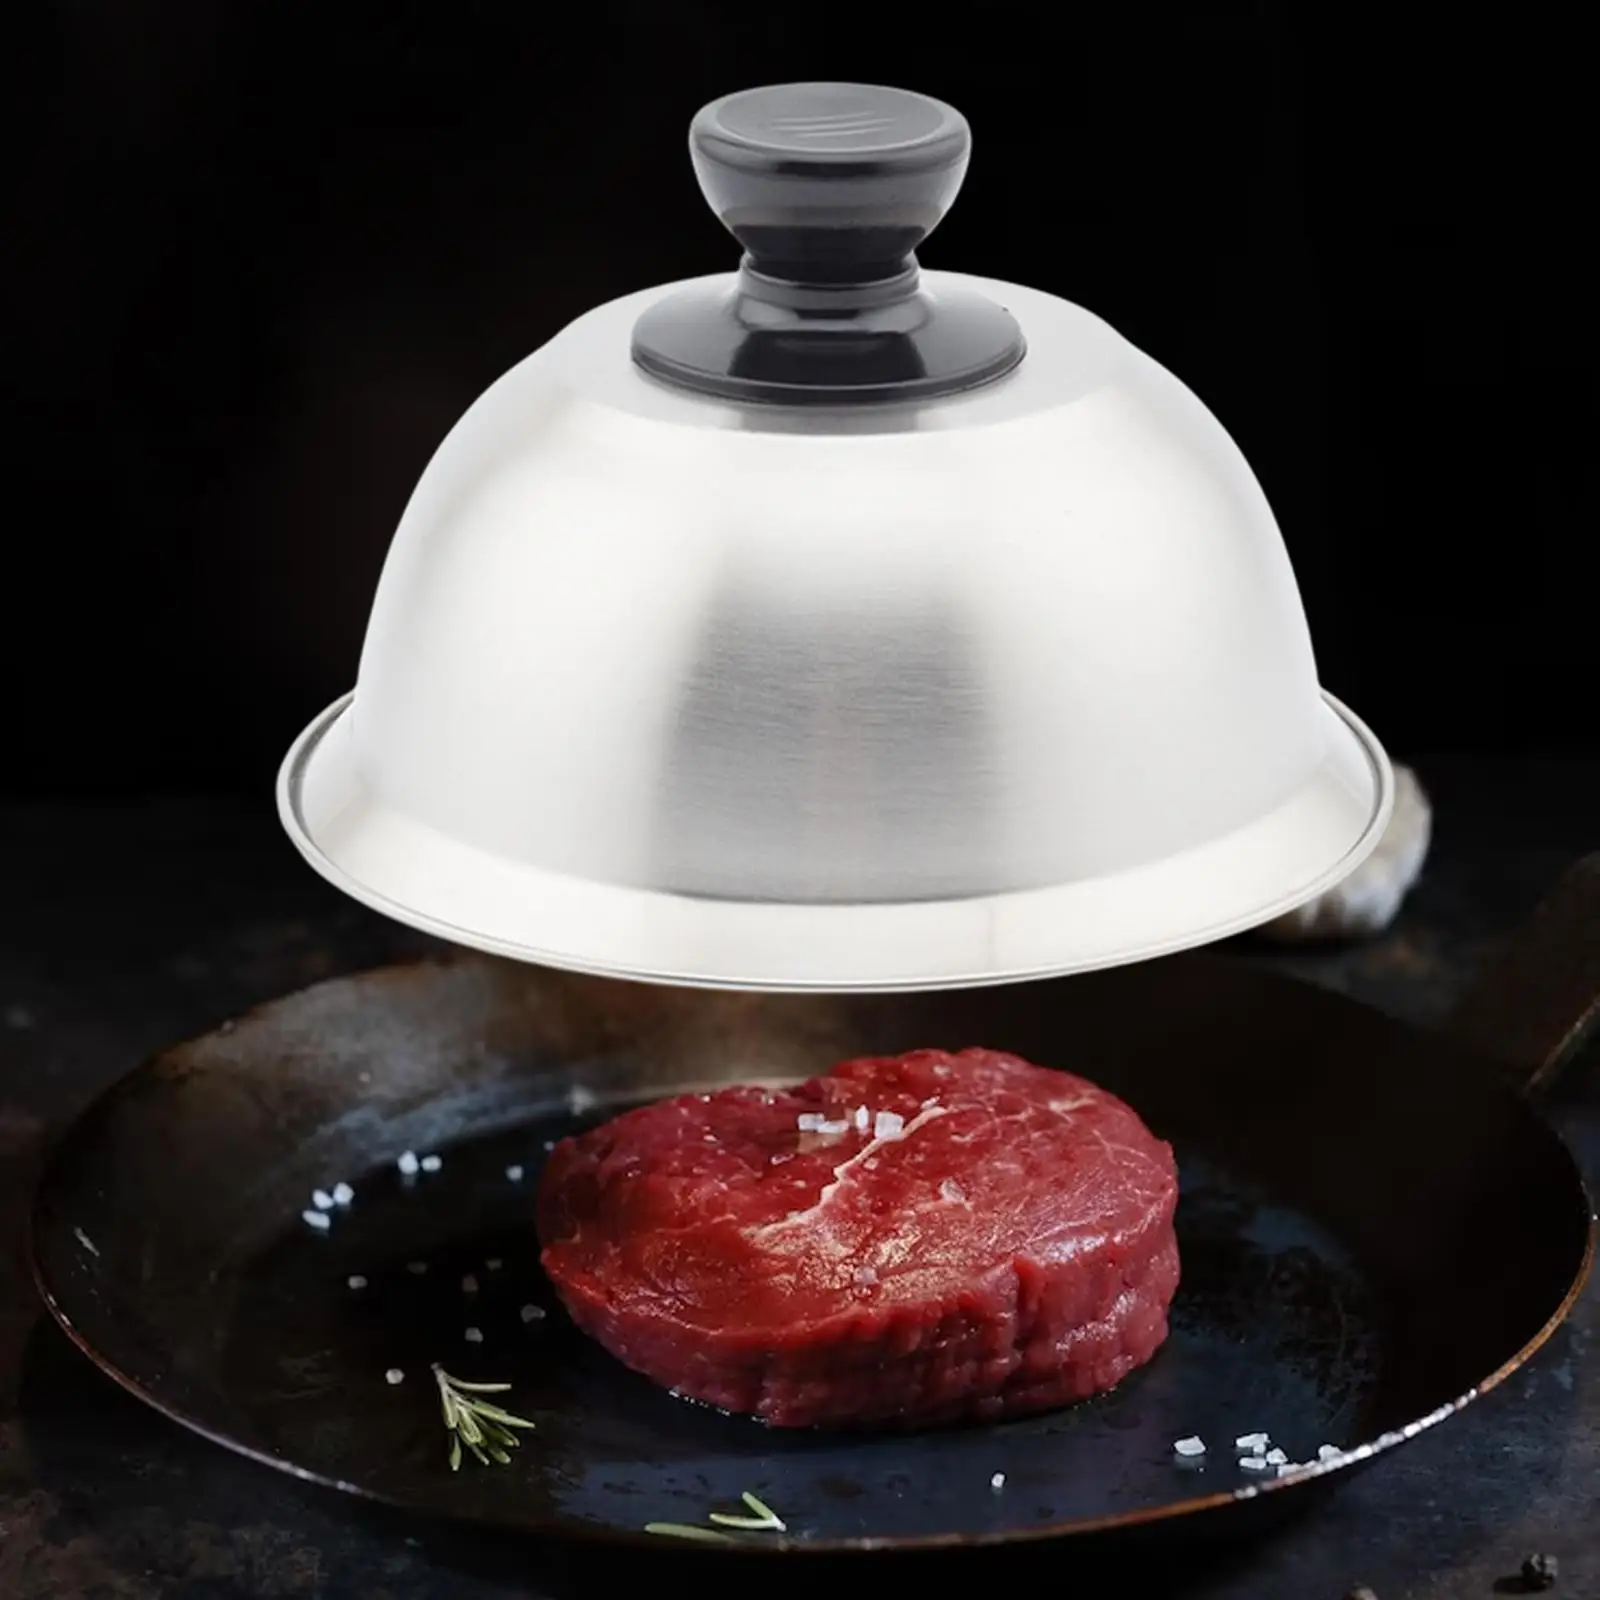 Basting Steaming Cover Cheese Melting Dome for steak Sandwiches Kitchen